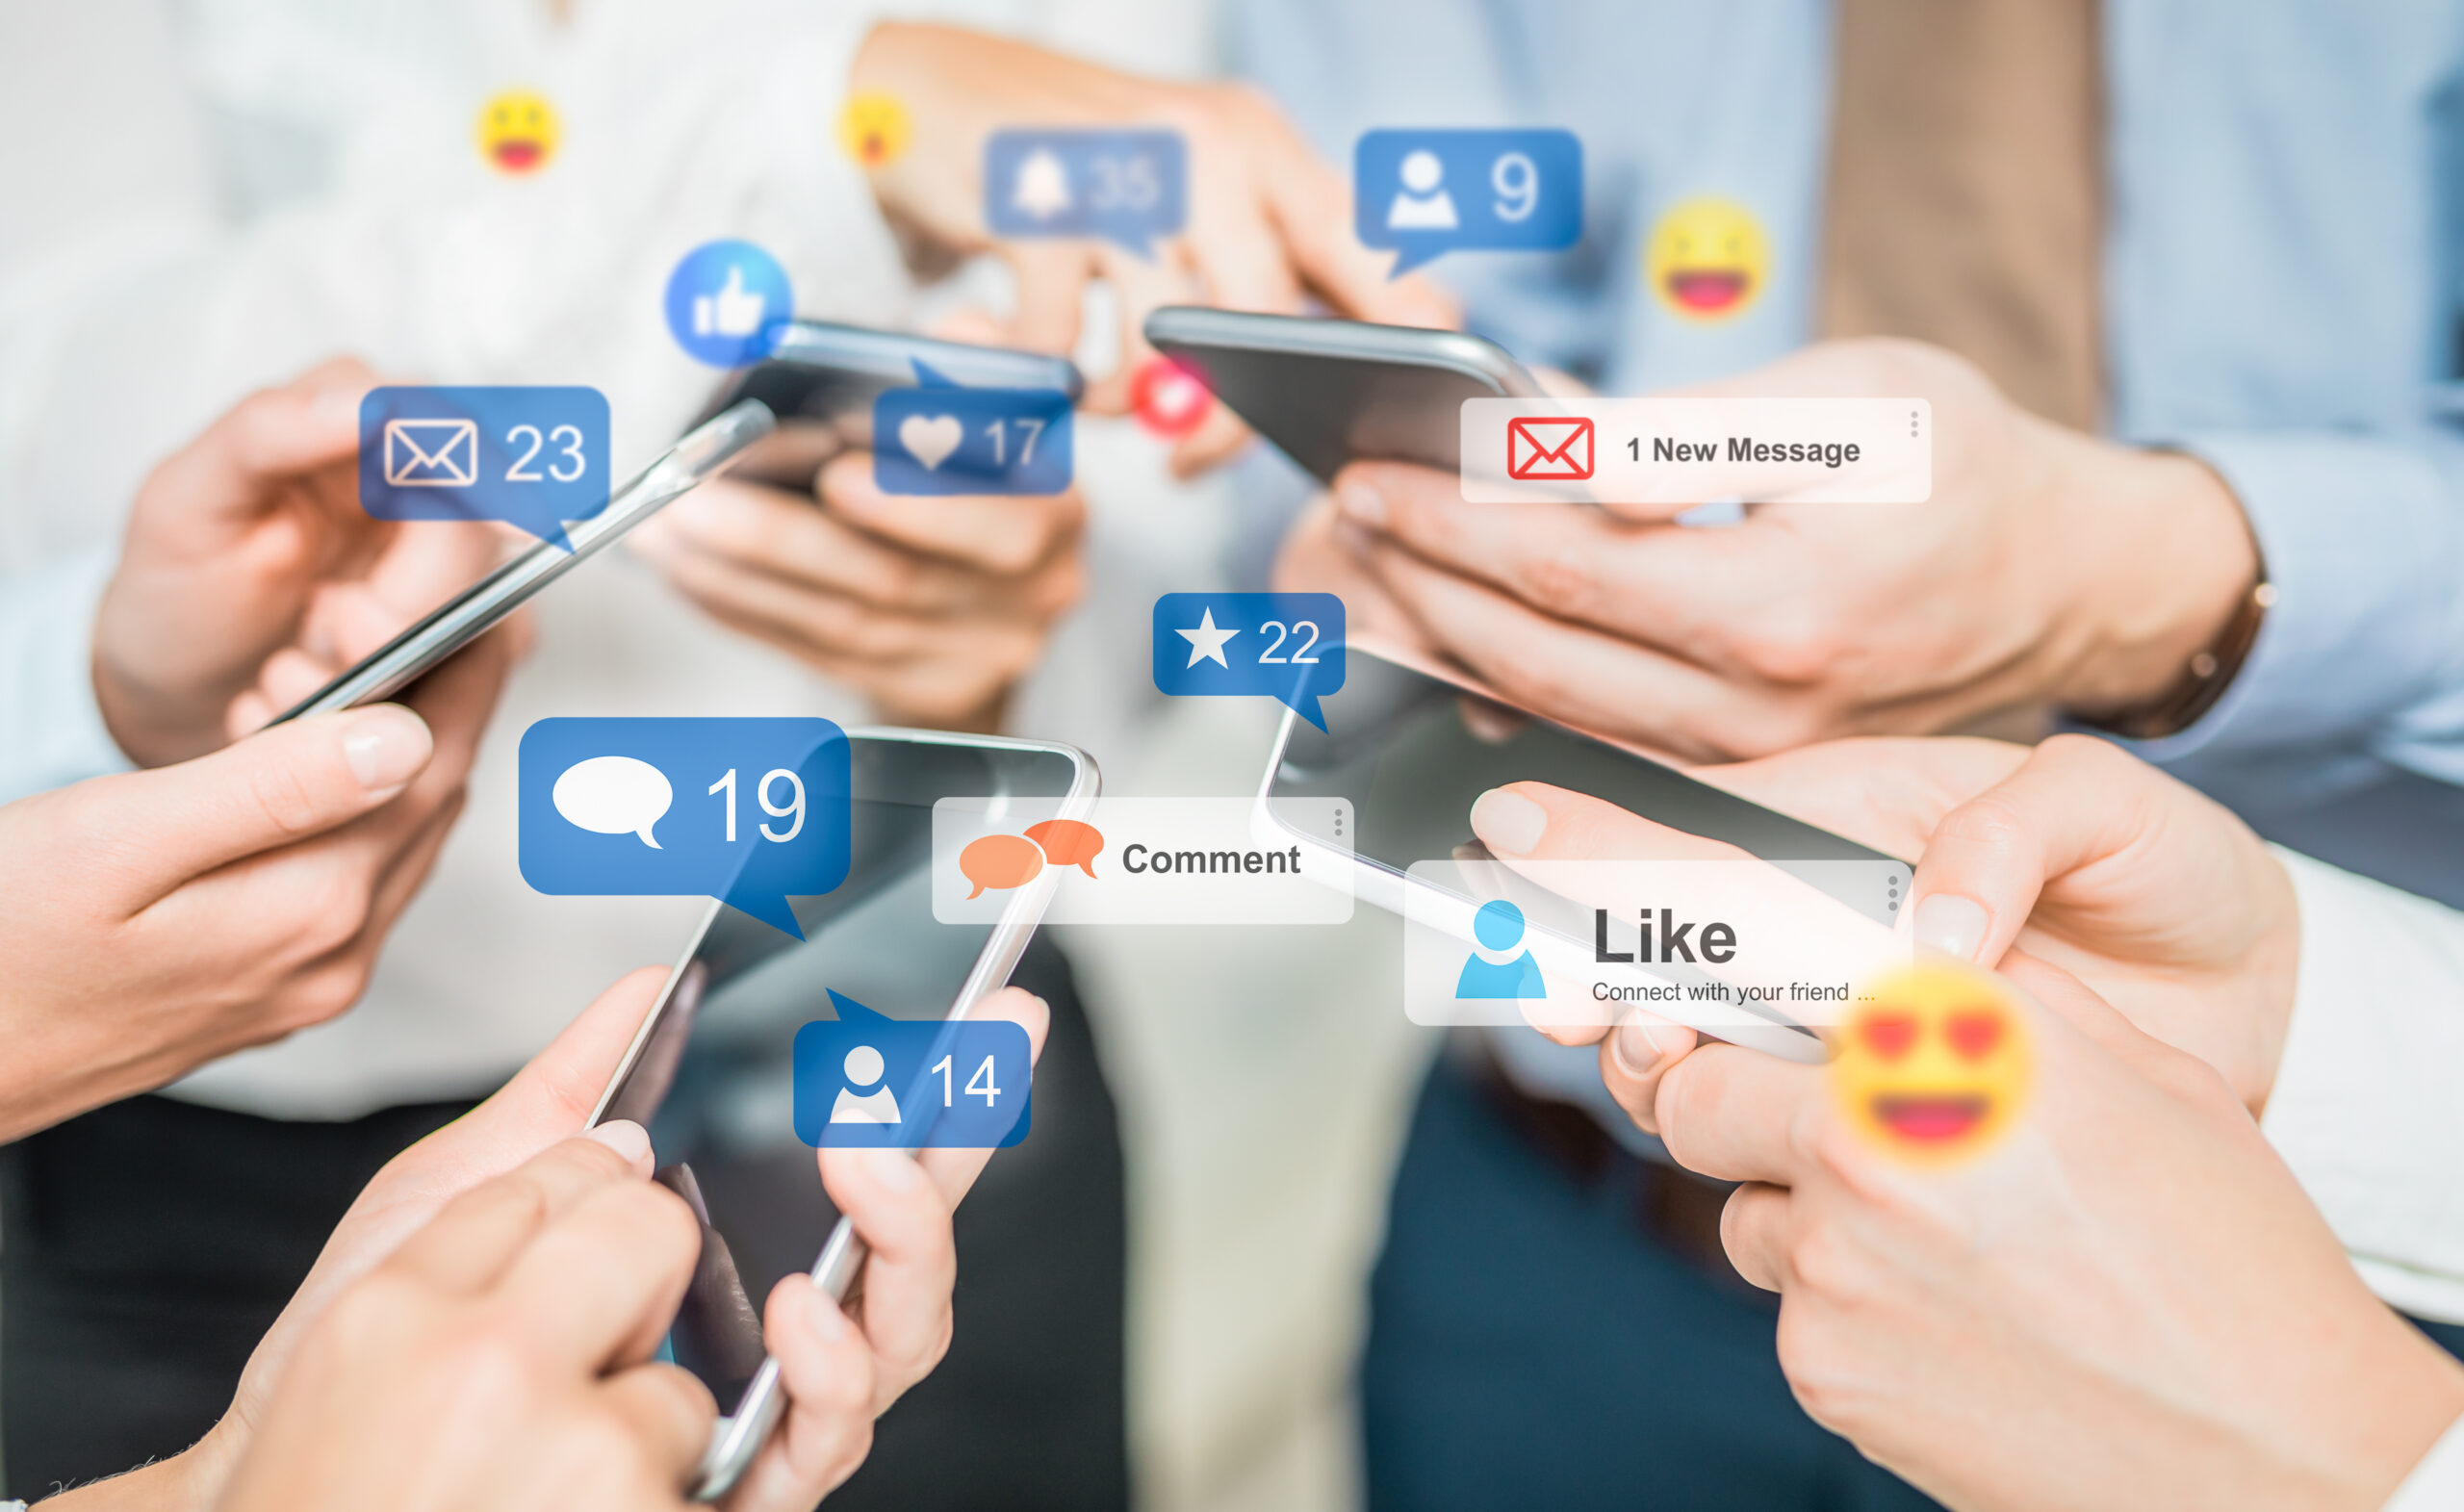 Several people on their phones on social media with floating icons representing likes, shares, and comments. The image represents the key role that social media can play in online engagement for small businesses.